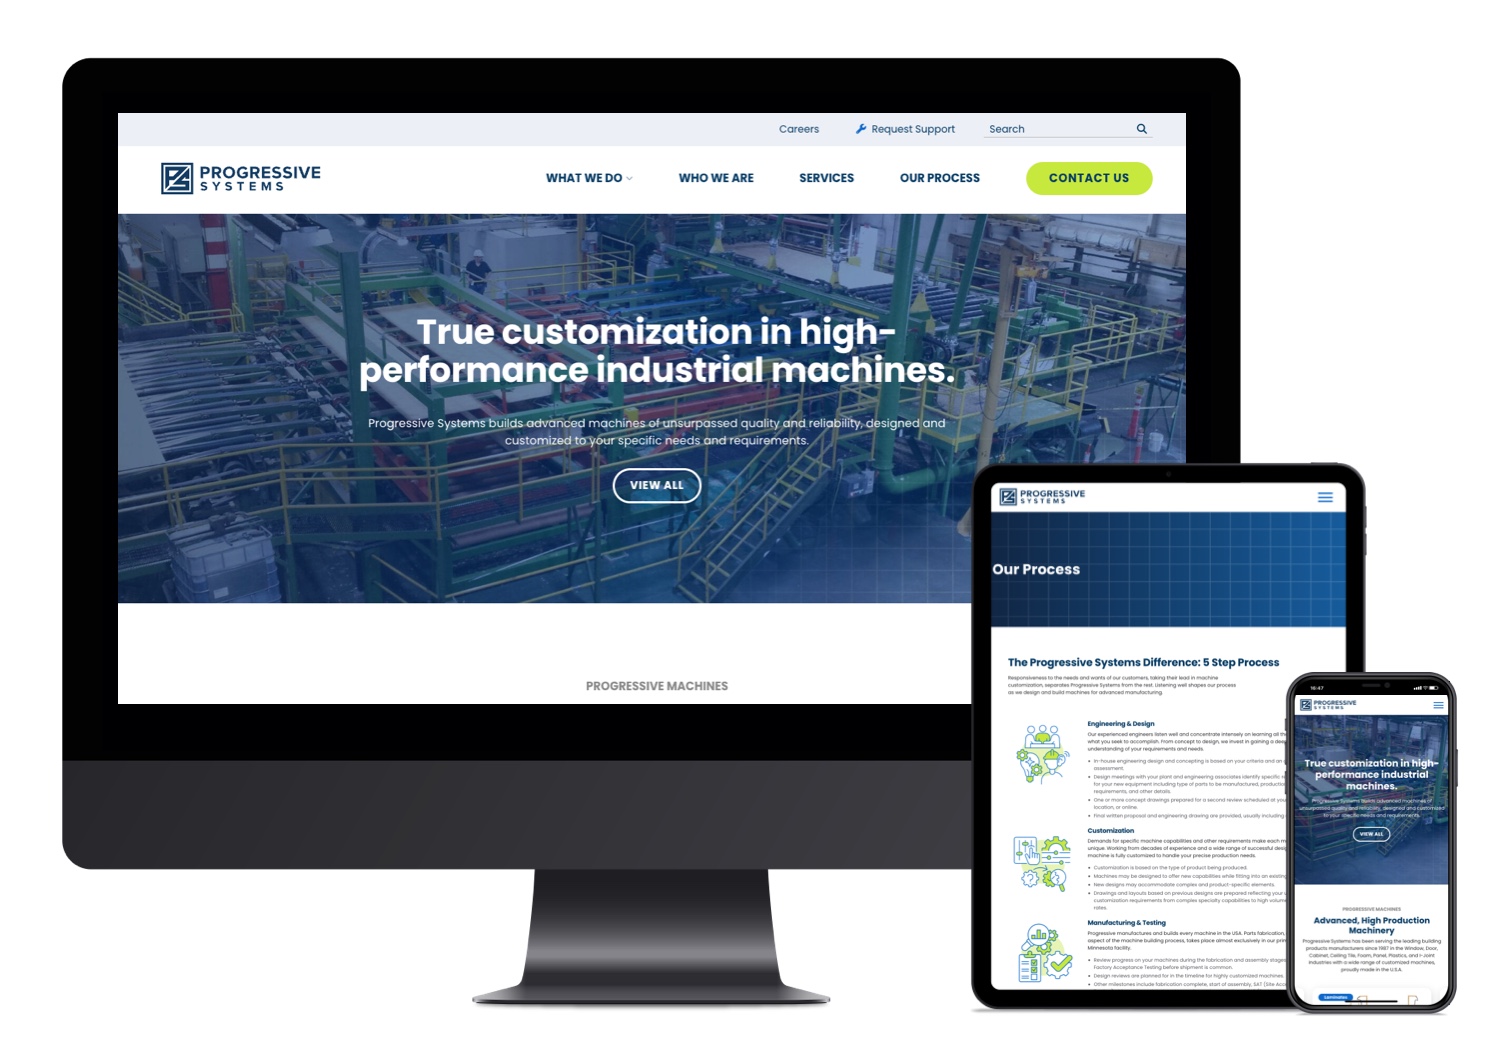 B2B Industrial Services Customized Products Web Design Progressive Systems Featured Small